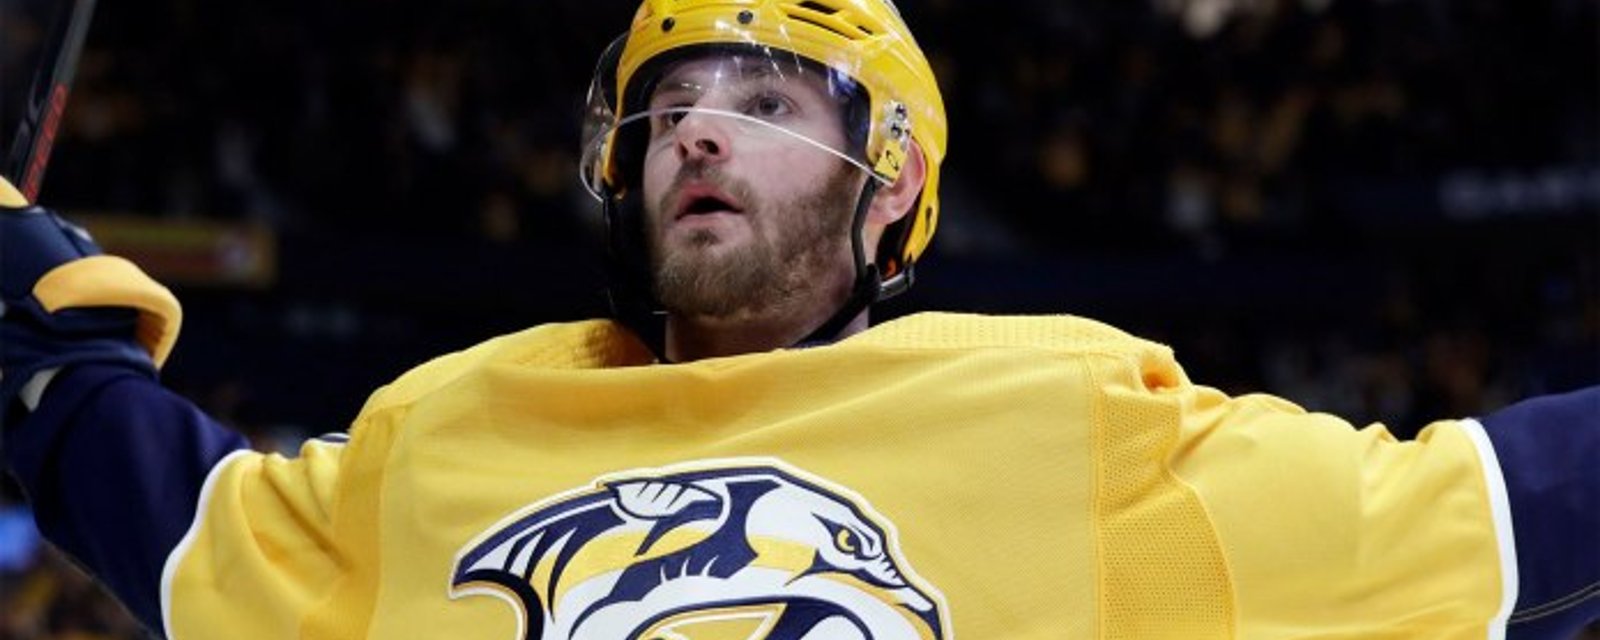 Breaking: Preds' Watson placed in Substance Abuse program and suspended without pay 